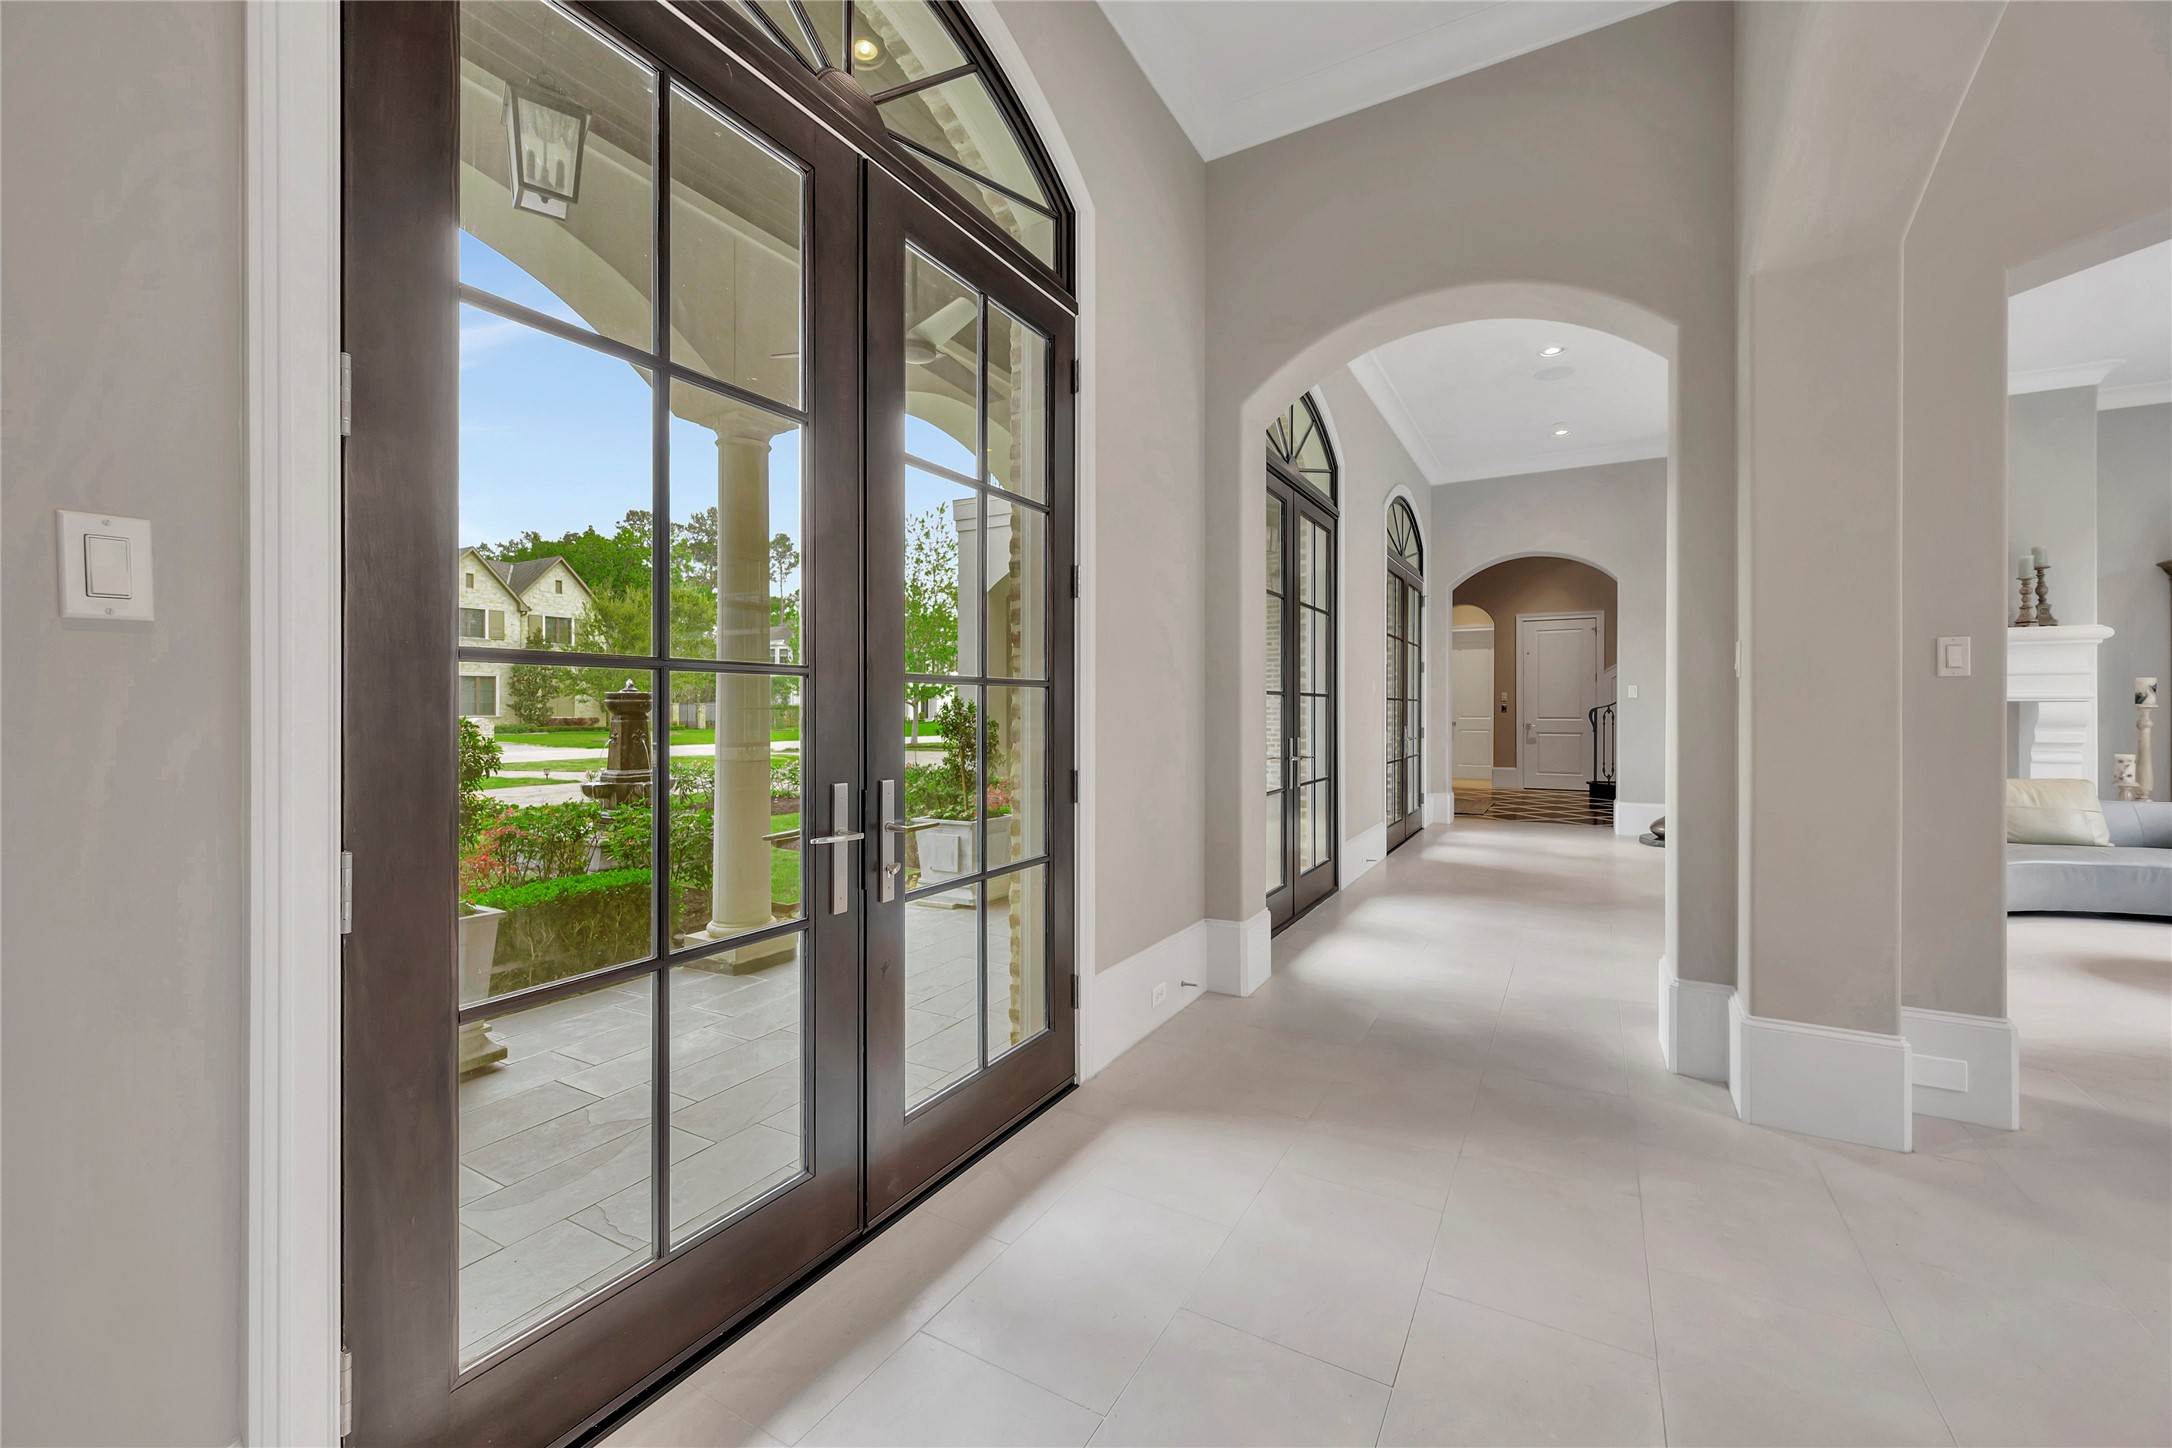 French Doors Connect Inside and Out